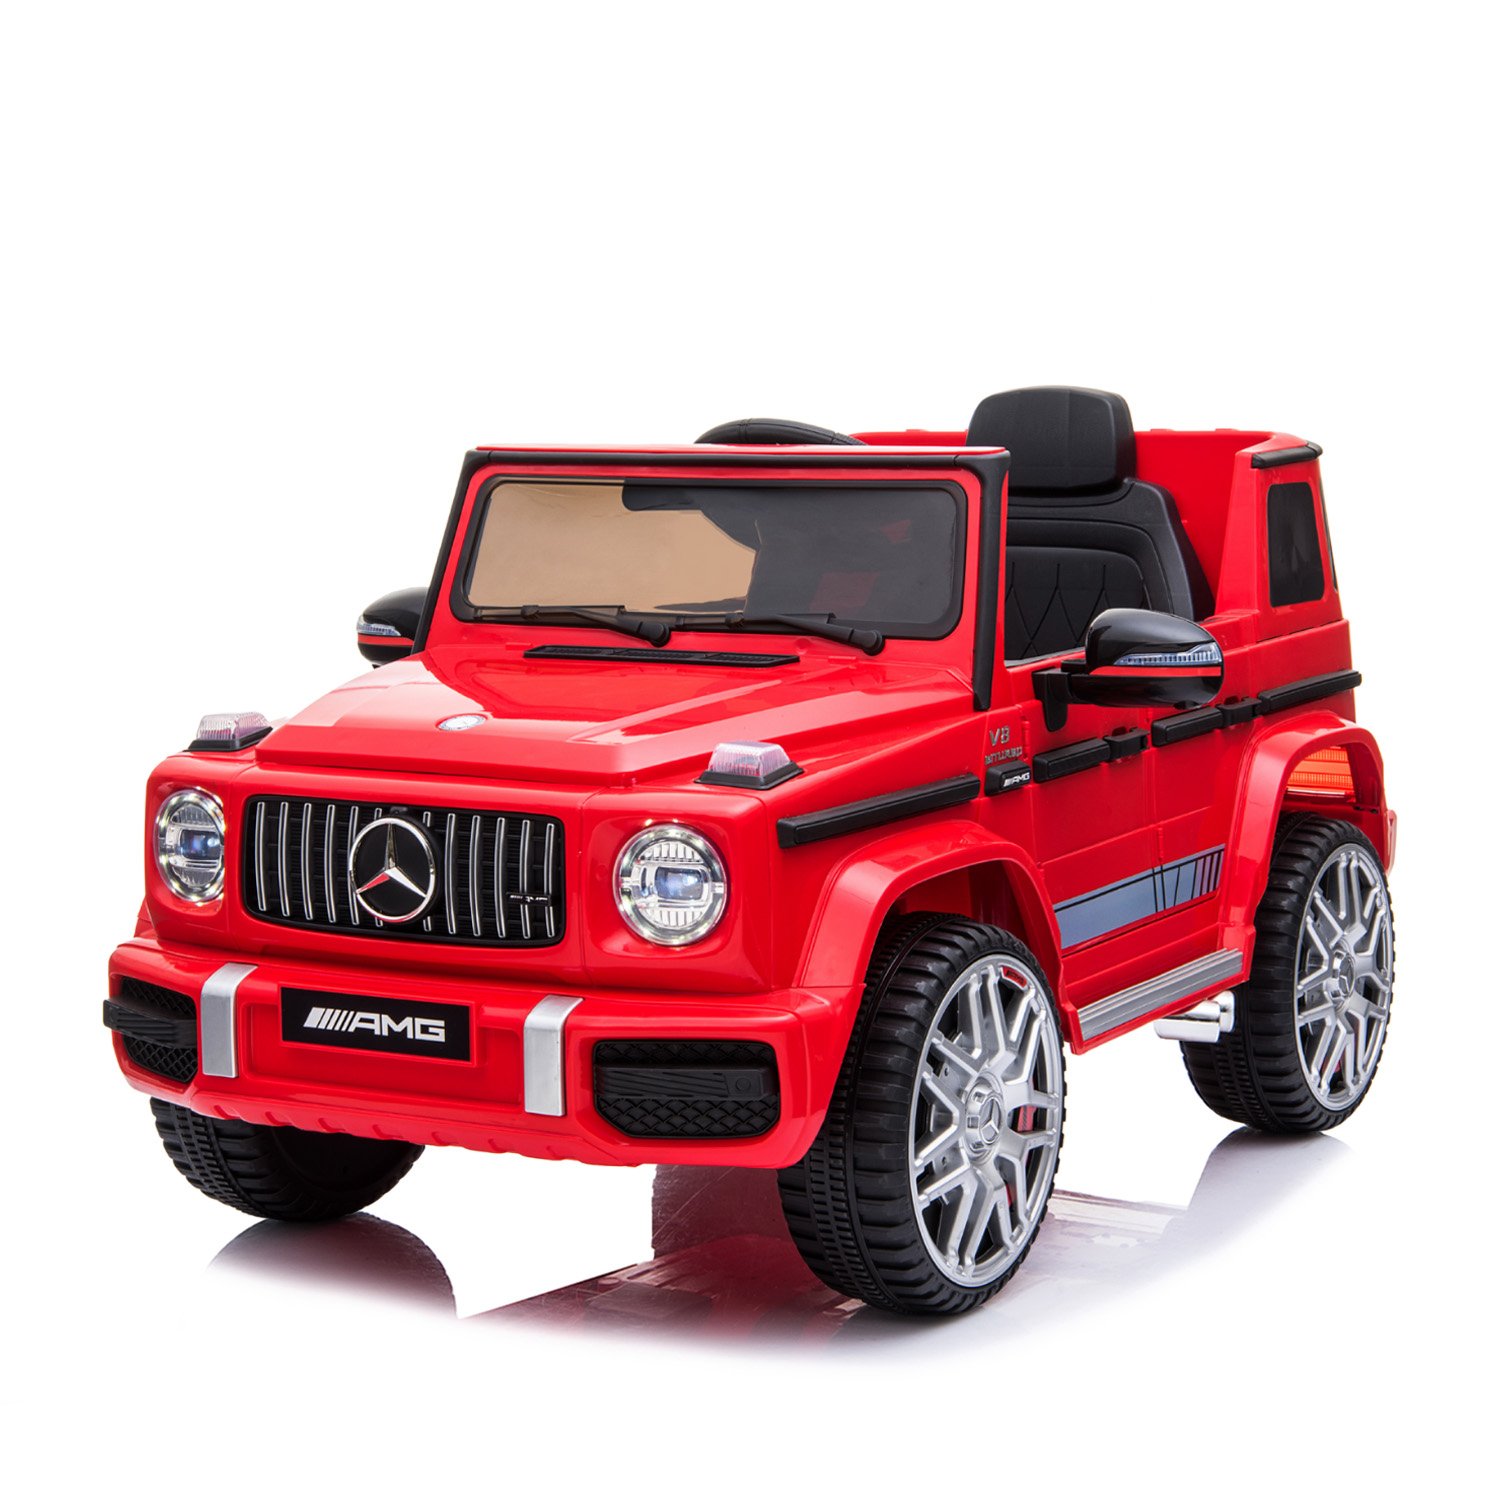 Mercedes Benz AMG G63 Licensed Kids Ride On Electric Car Remote Control - Red 1